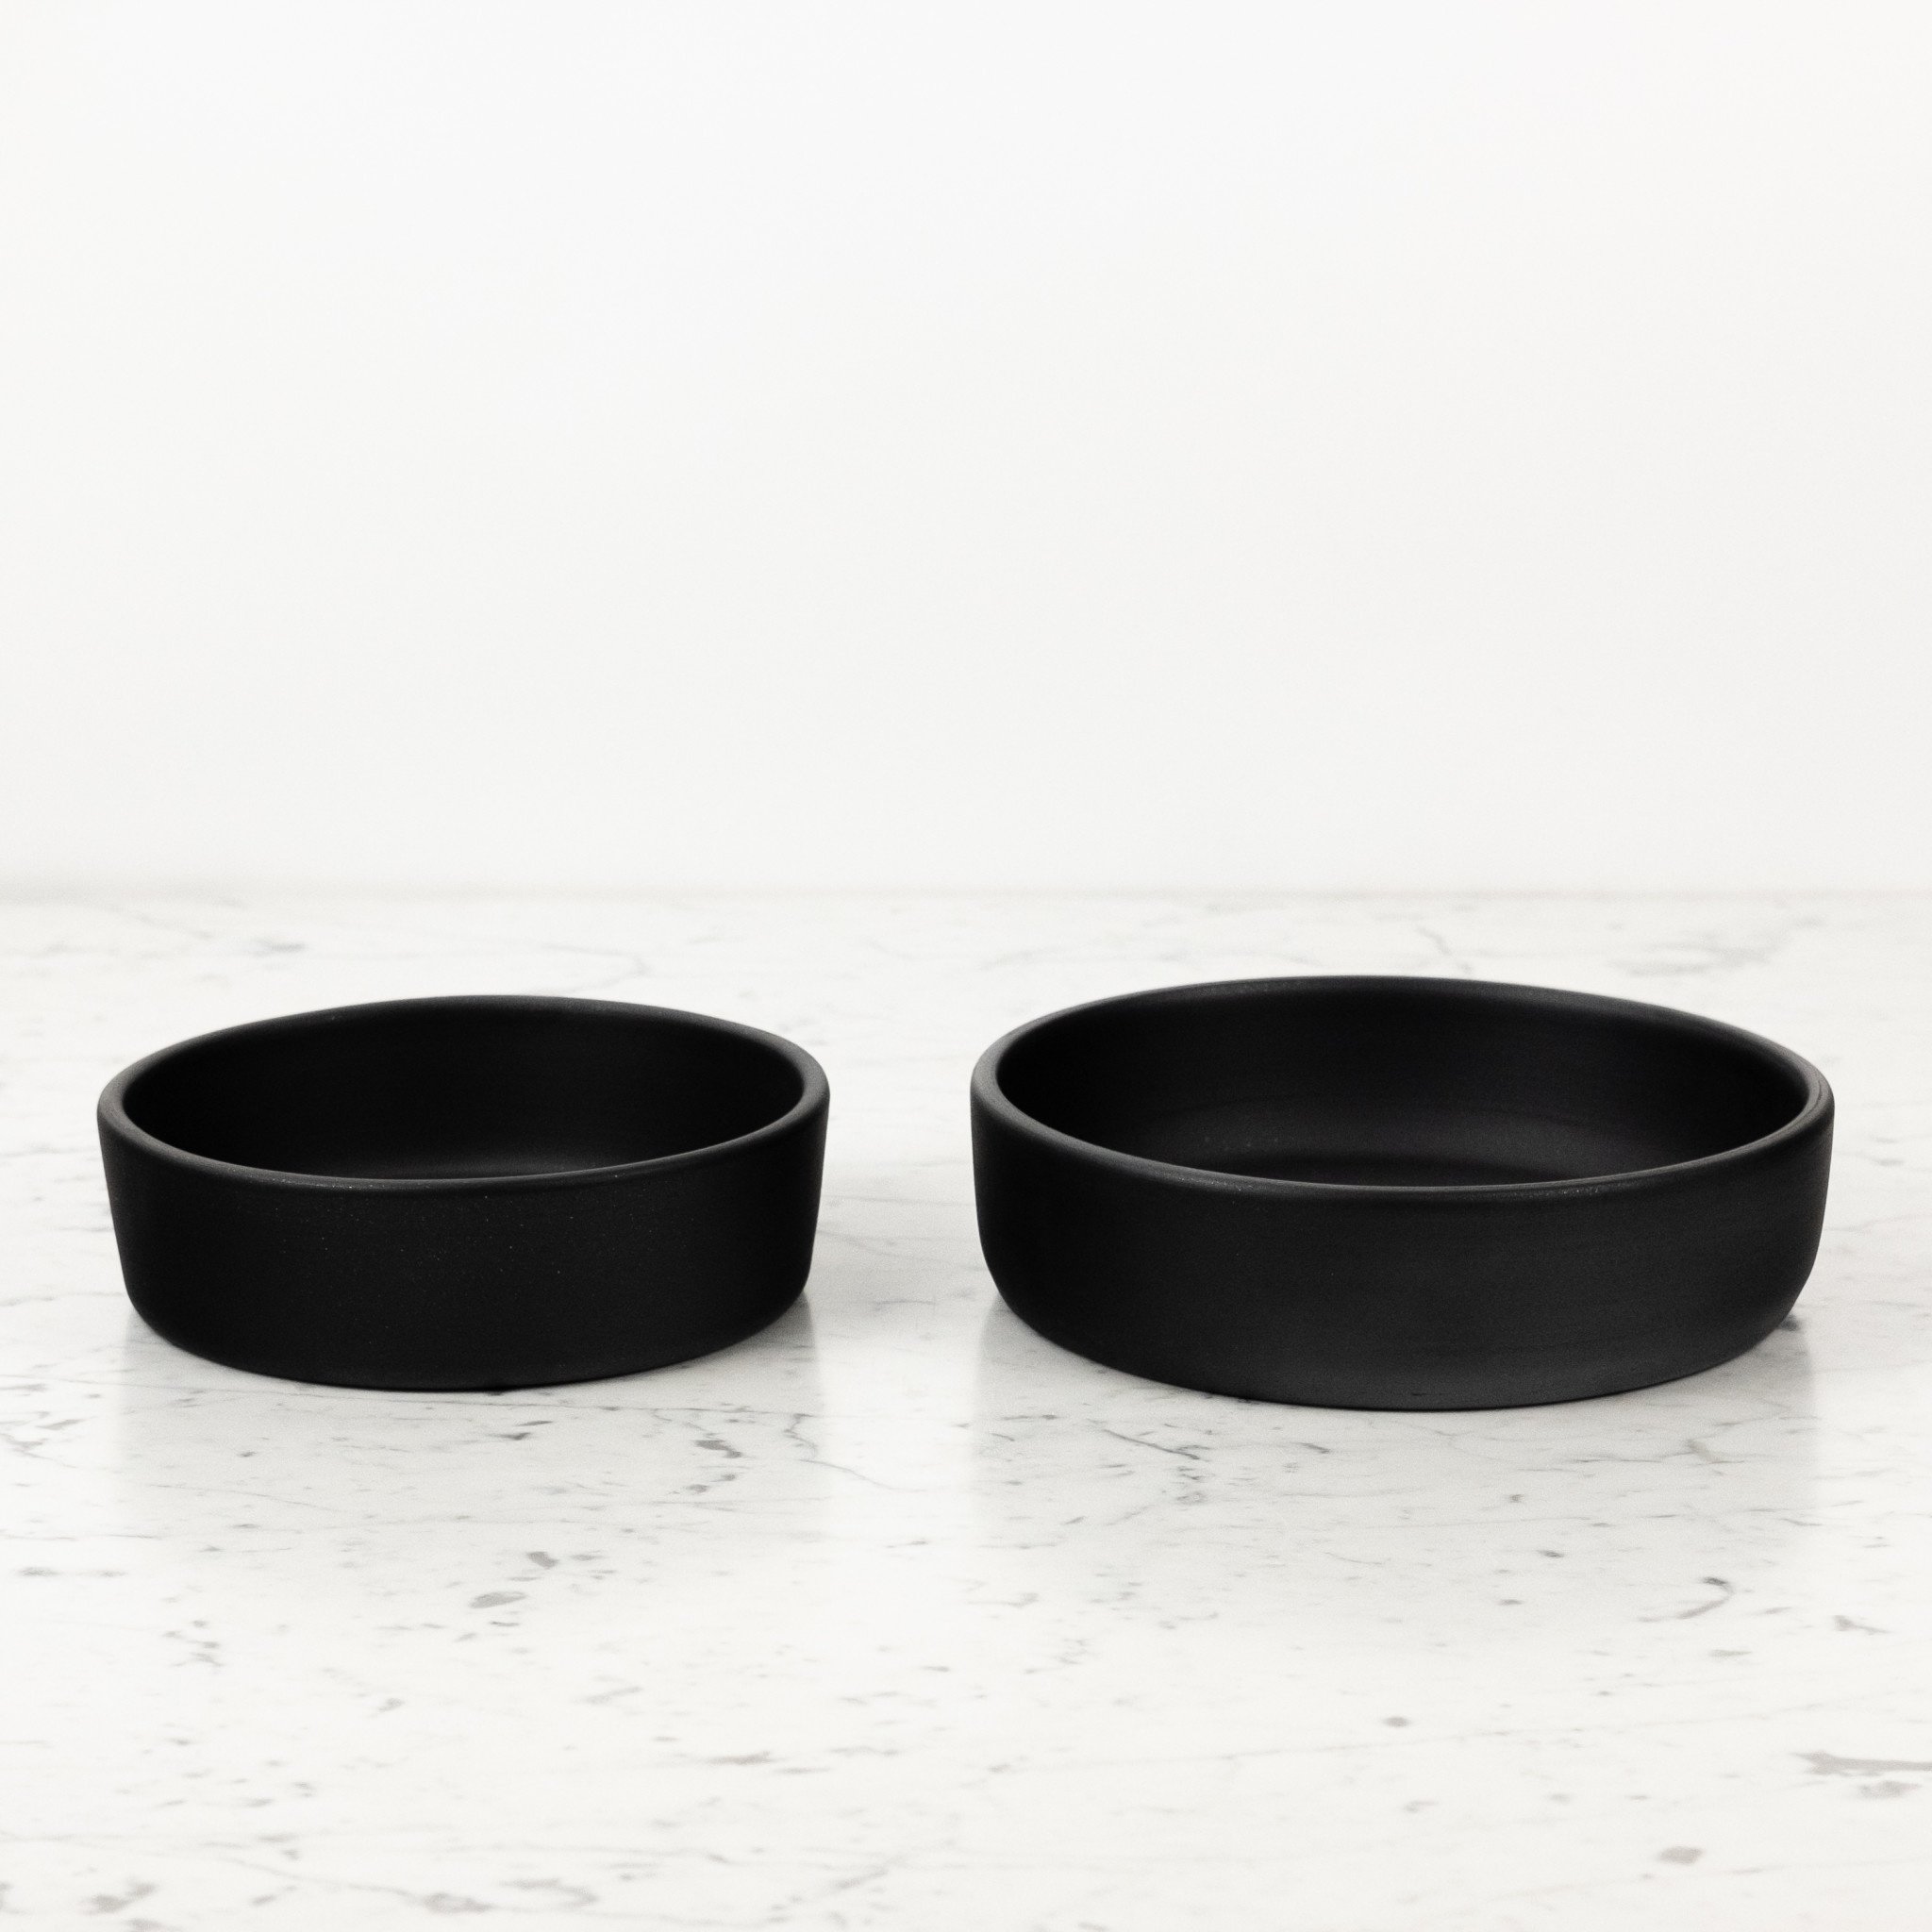 Set of 2 Portuguese Barro Negro Handmade Baking Dishes -10" and 8" D